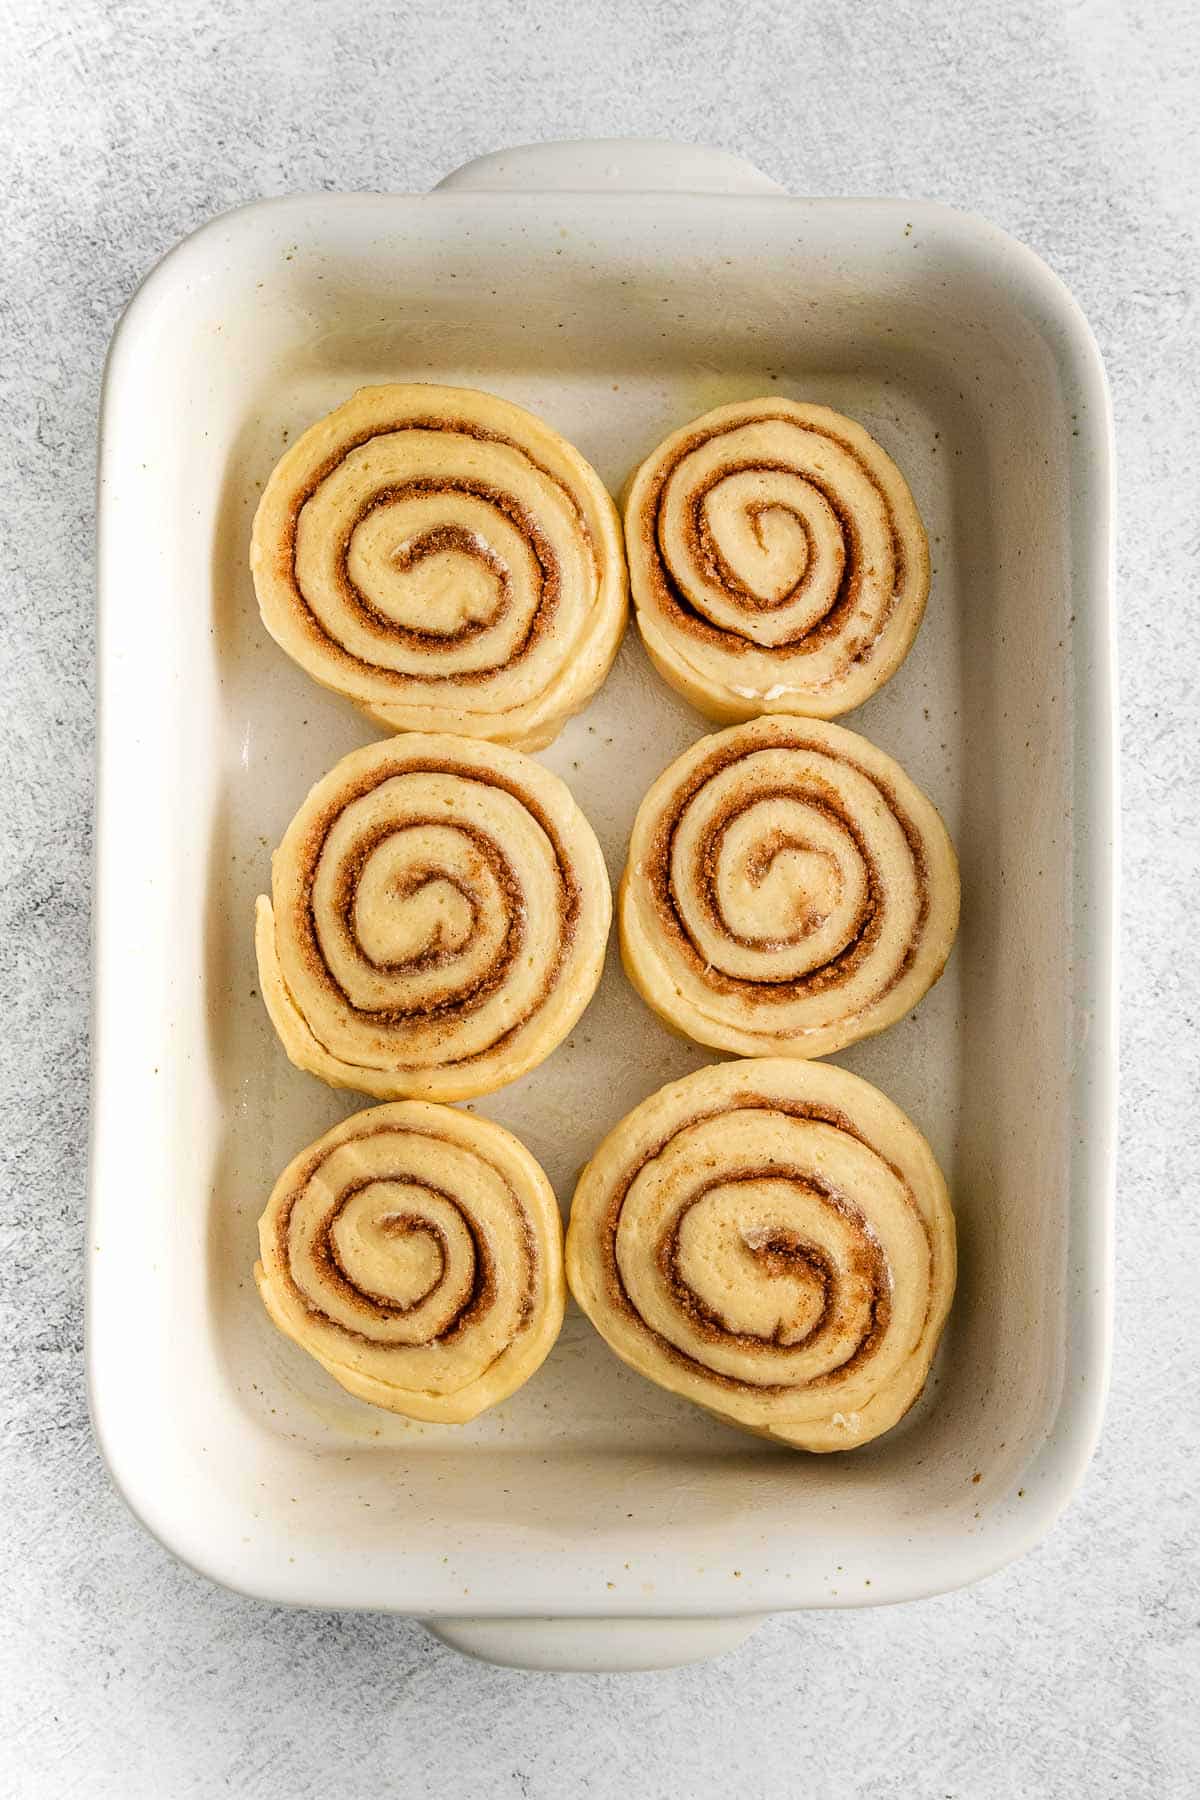 six uncooked cinnamon rolls in a white rectangle baking dish.